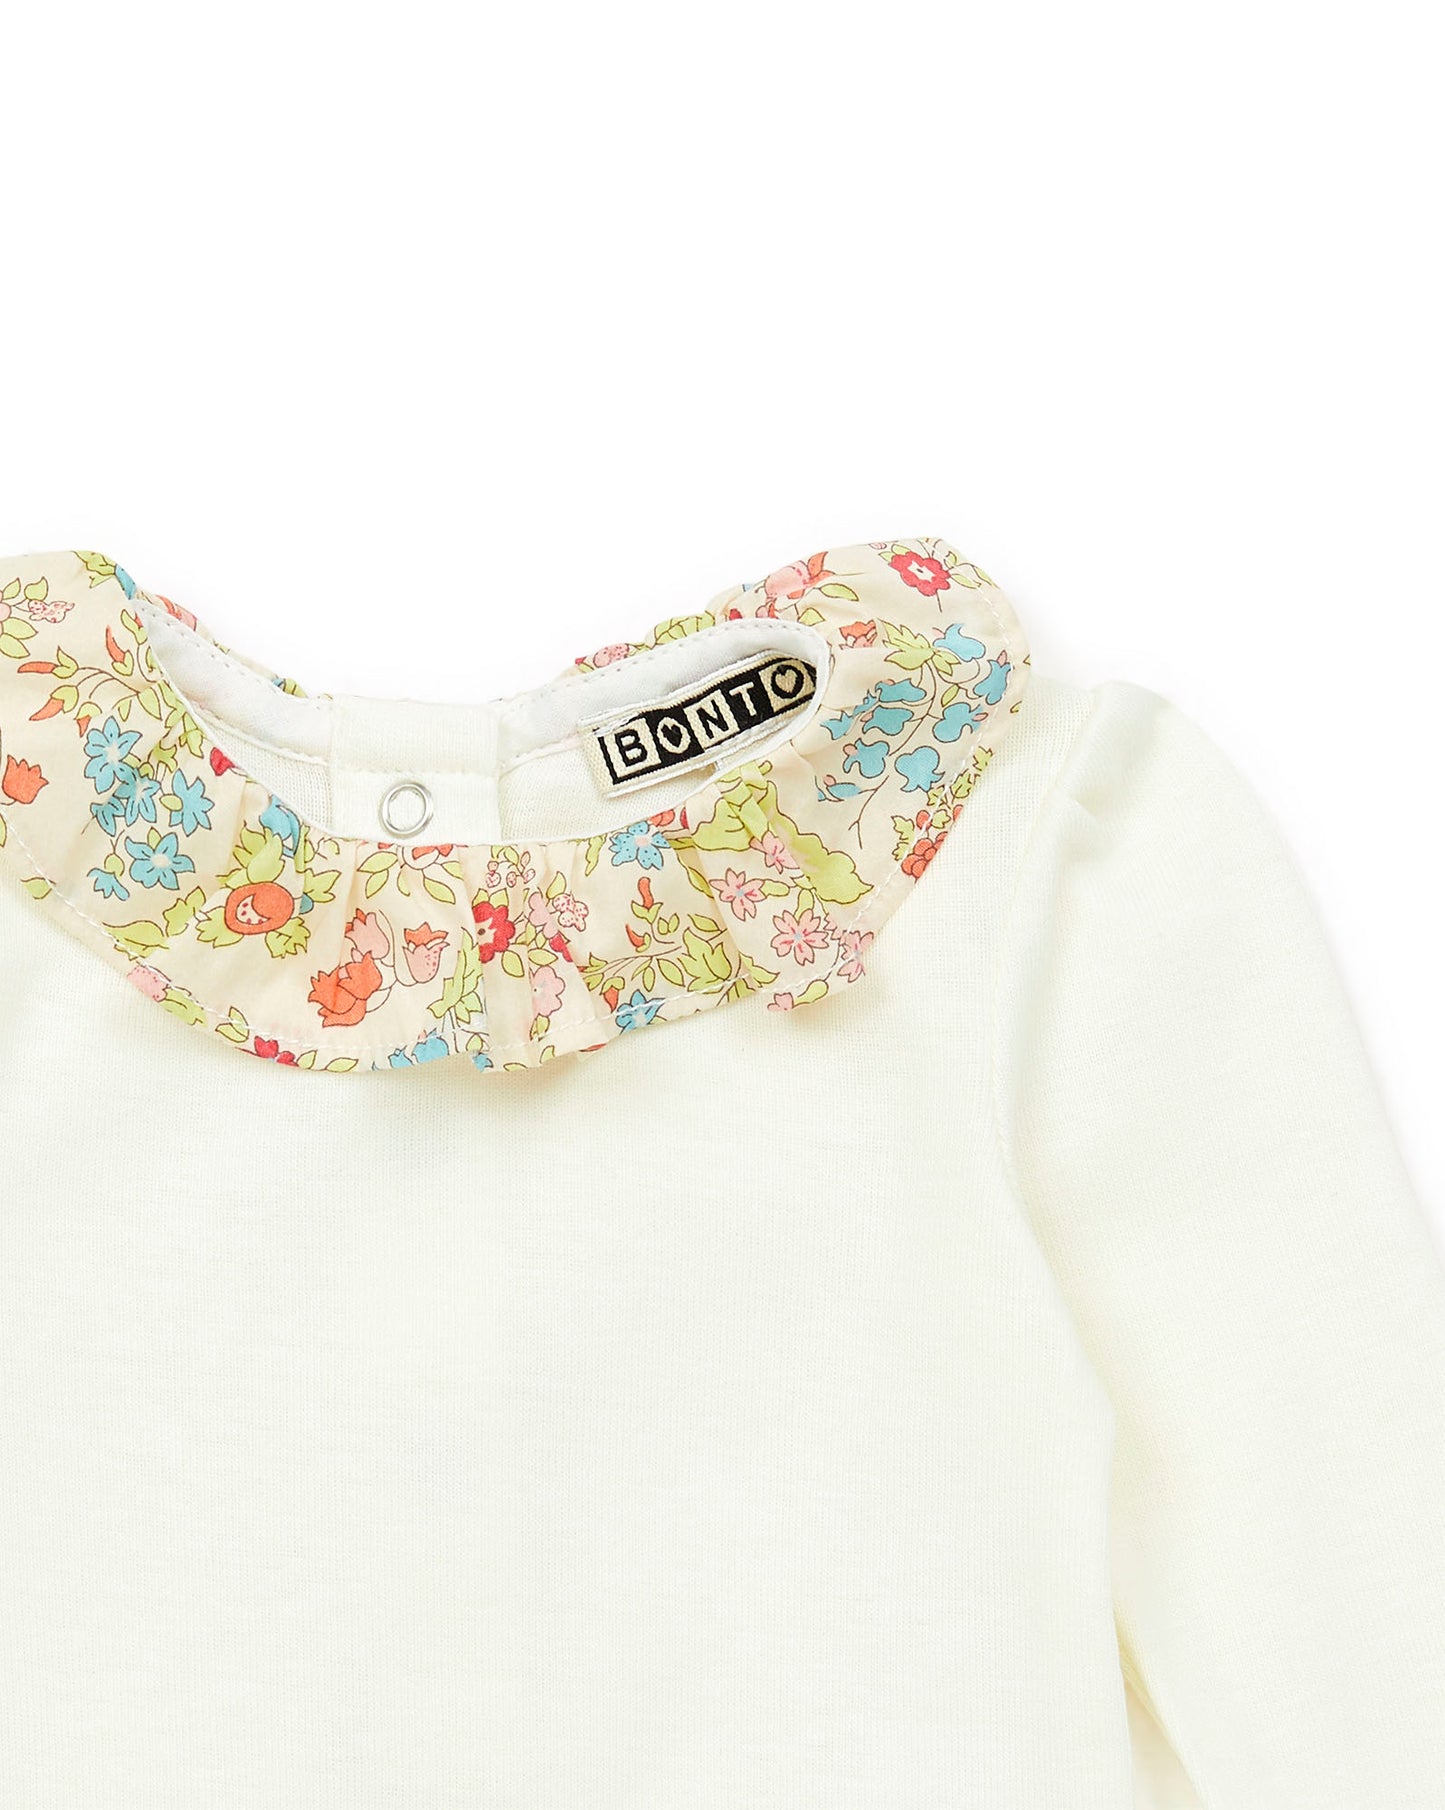 Body - Collar Flowers made with Liberty Manufacture 100% Organic cotton Baby